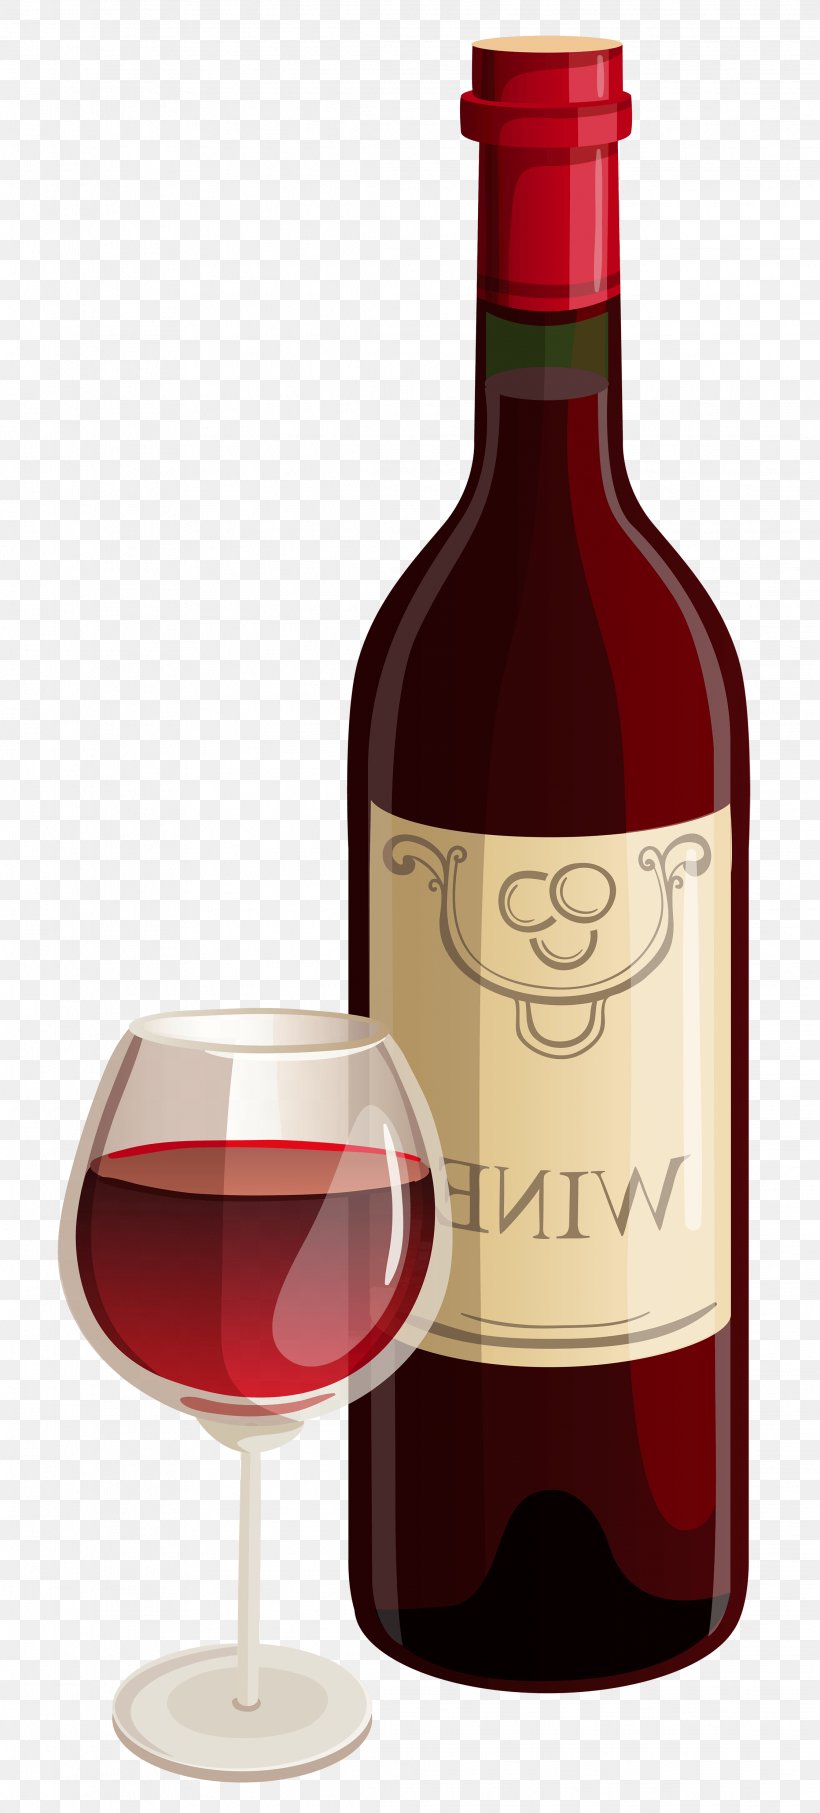 Red Wine Wine Glass Wine Cocktail Dessert Wine, PNG, 2237x4946px, Red Wine, Bottle, Champagne, Cup, Dessert Wine Download Free